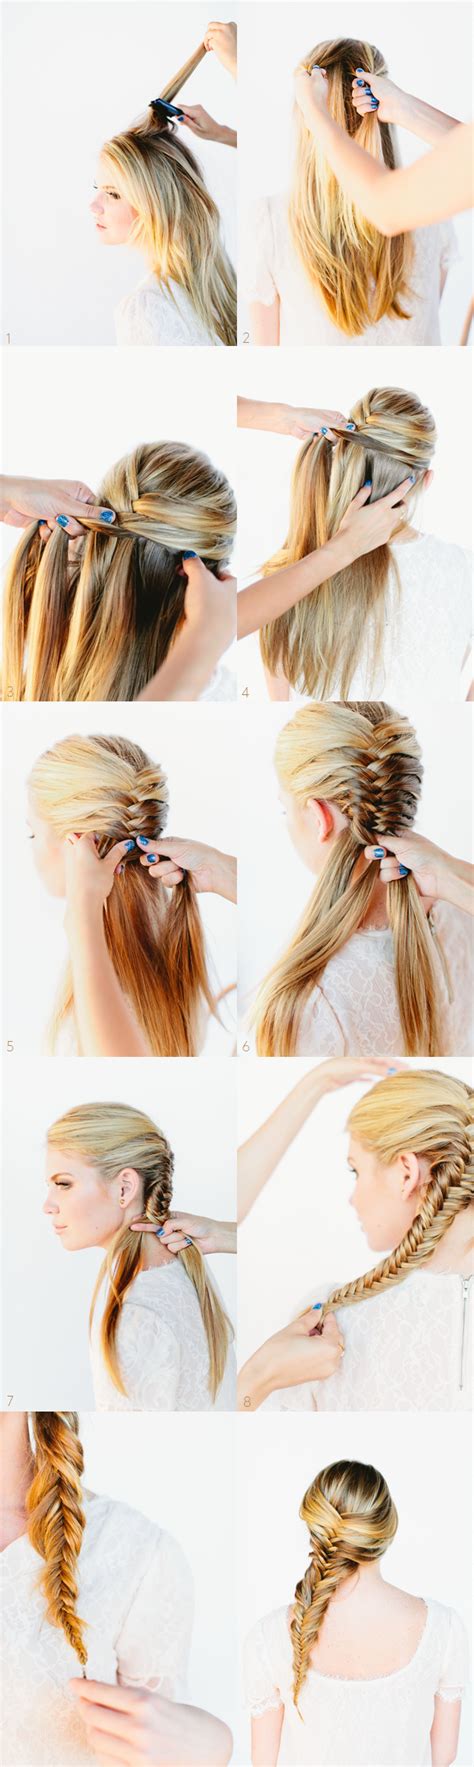 Braided Styles For Every Length Of Hair Her Campus